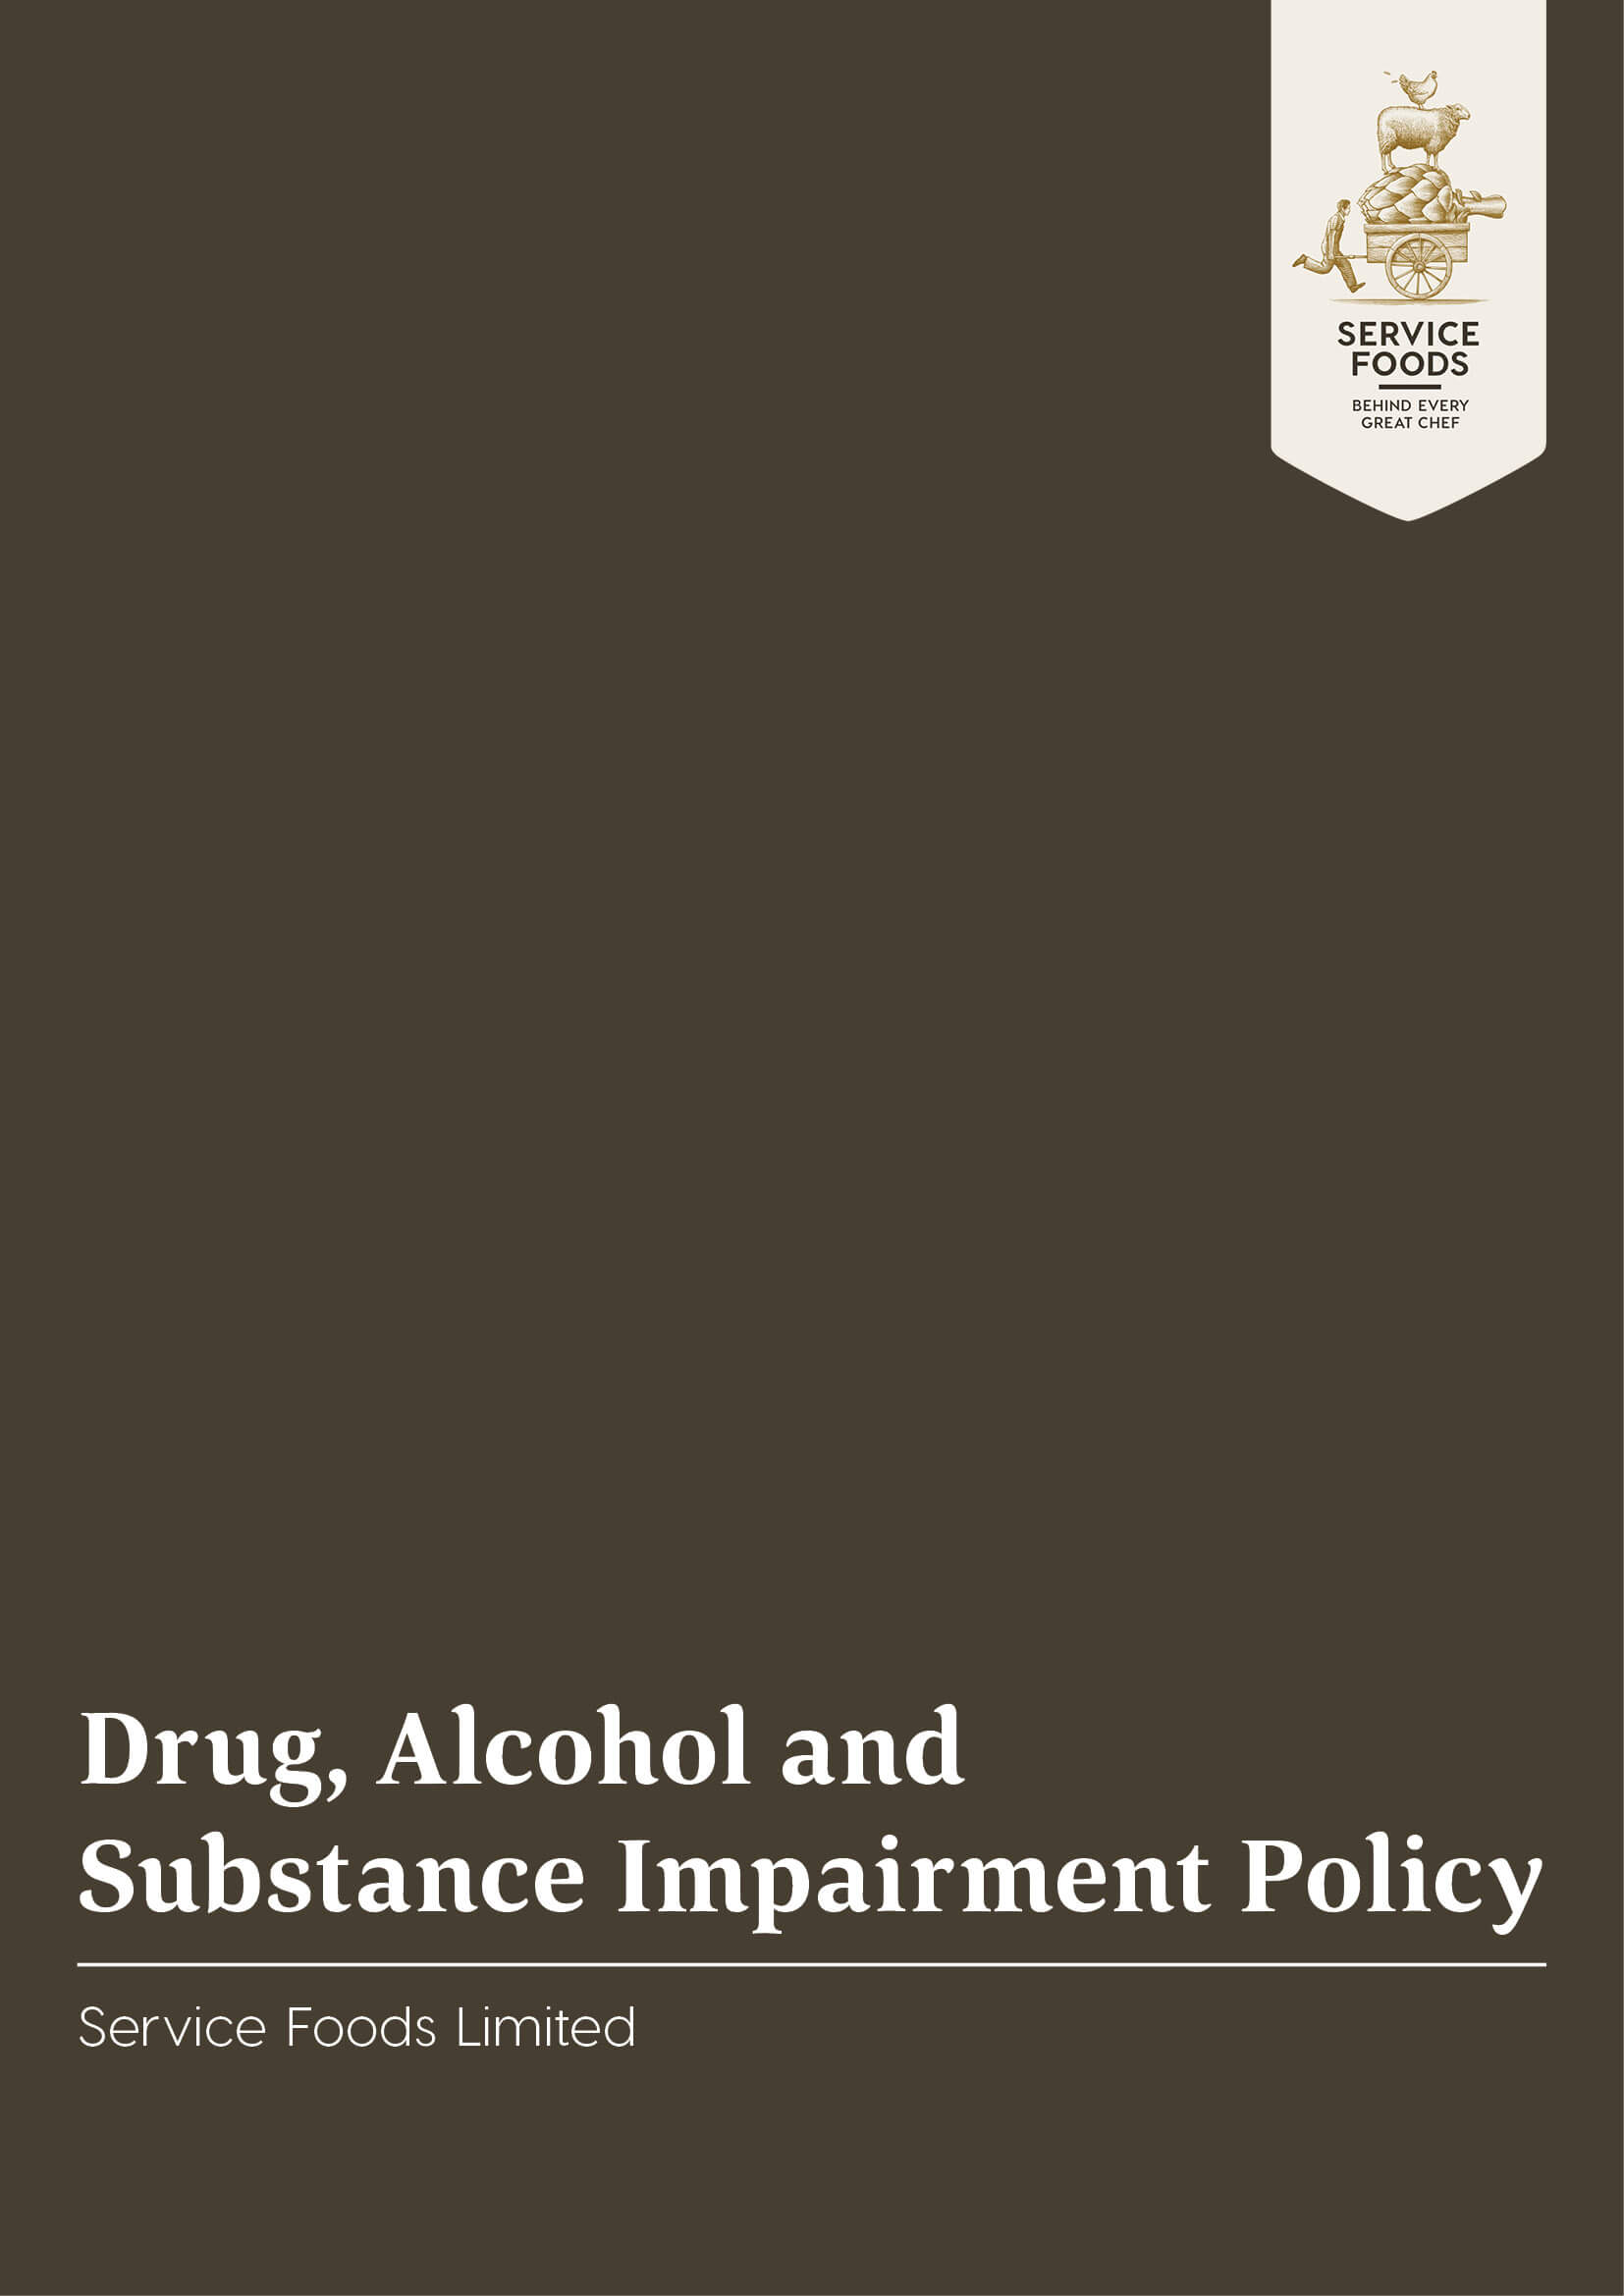 Drug, Alcohol and Substance Impairment Policy